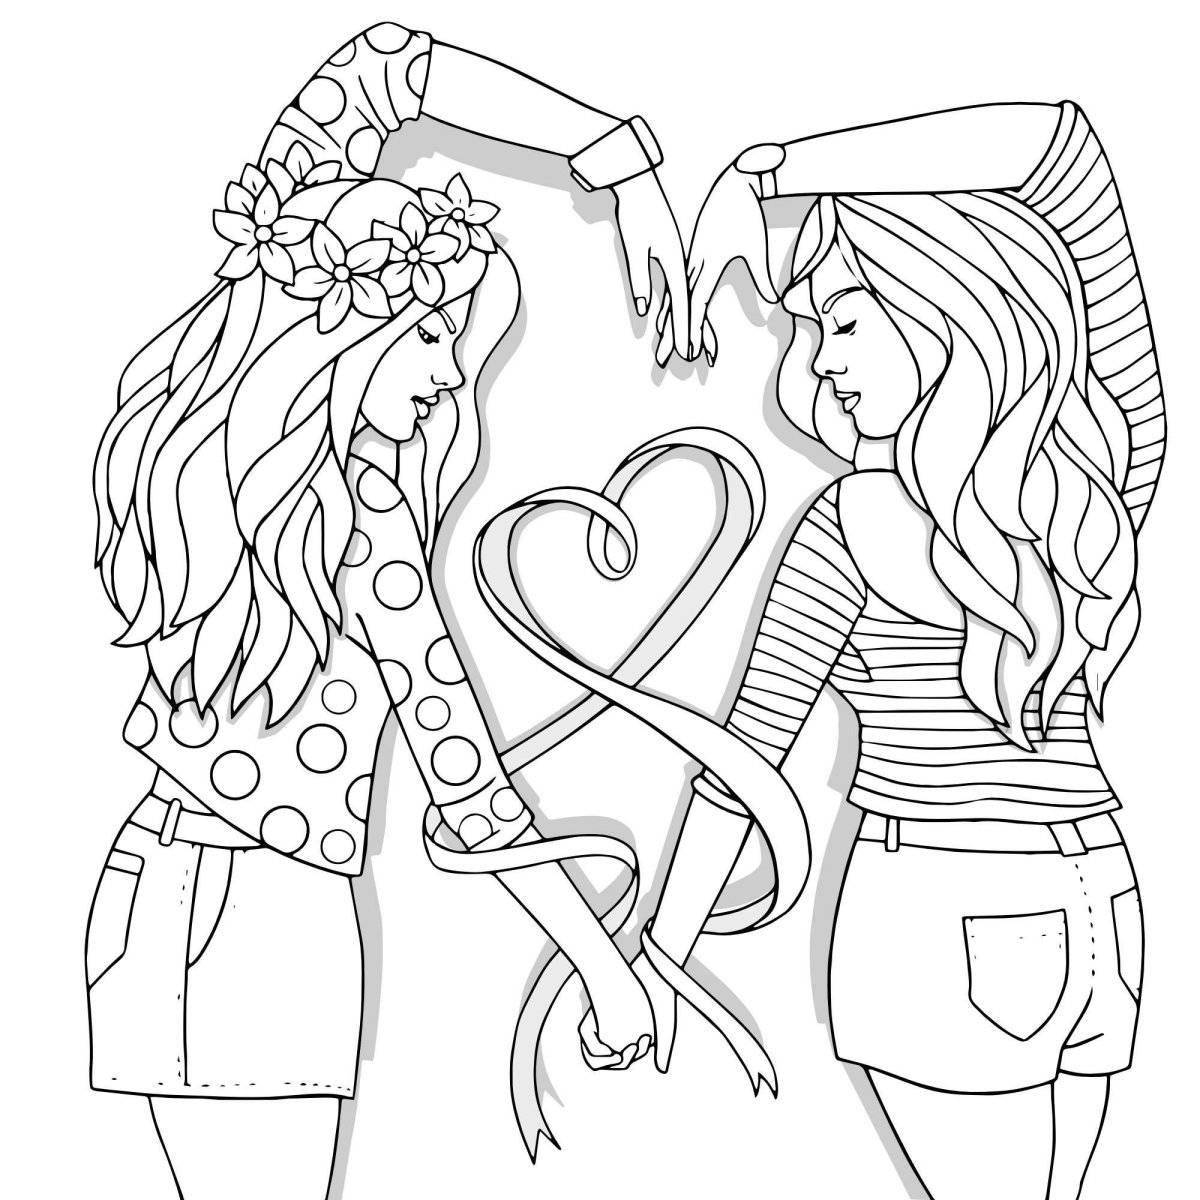 Coloring page cheering best friends